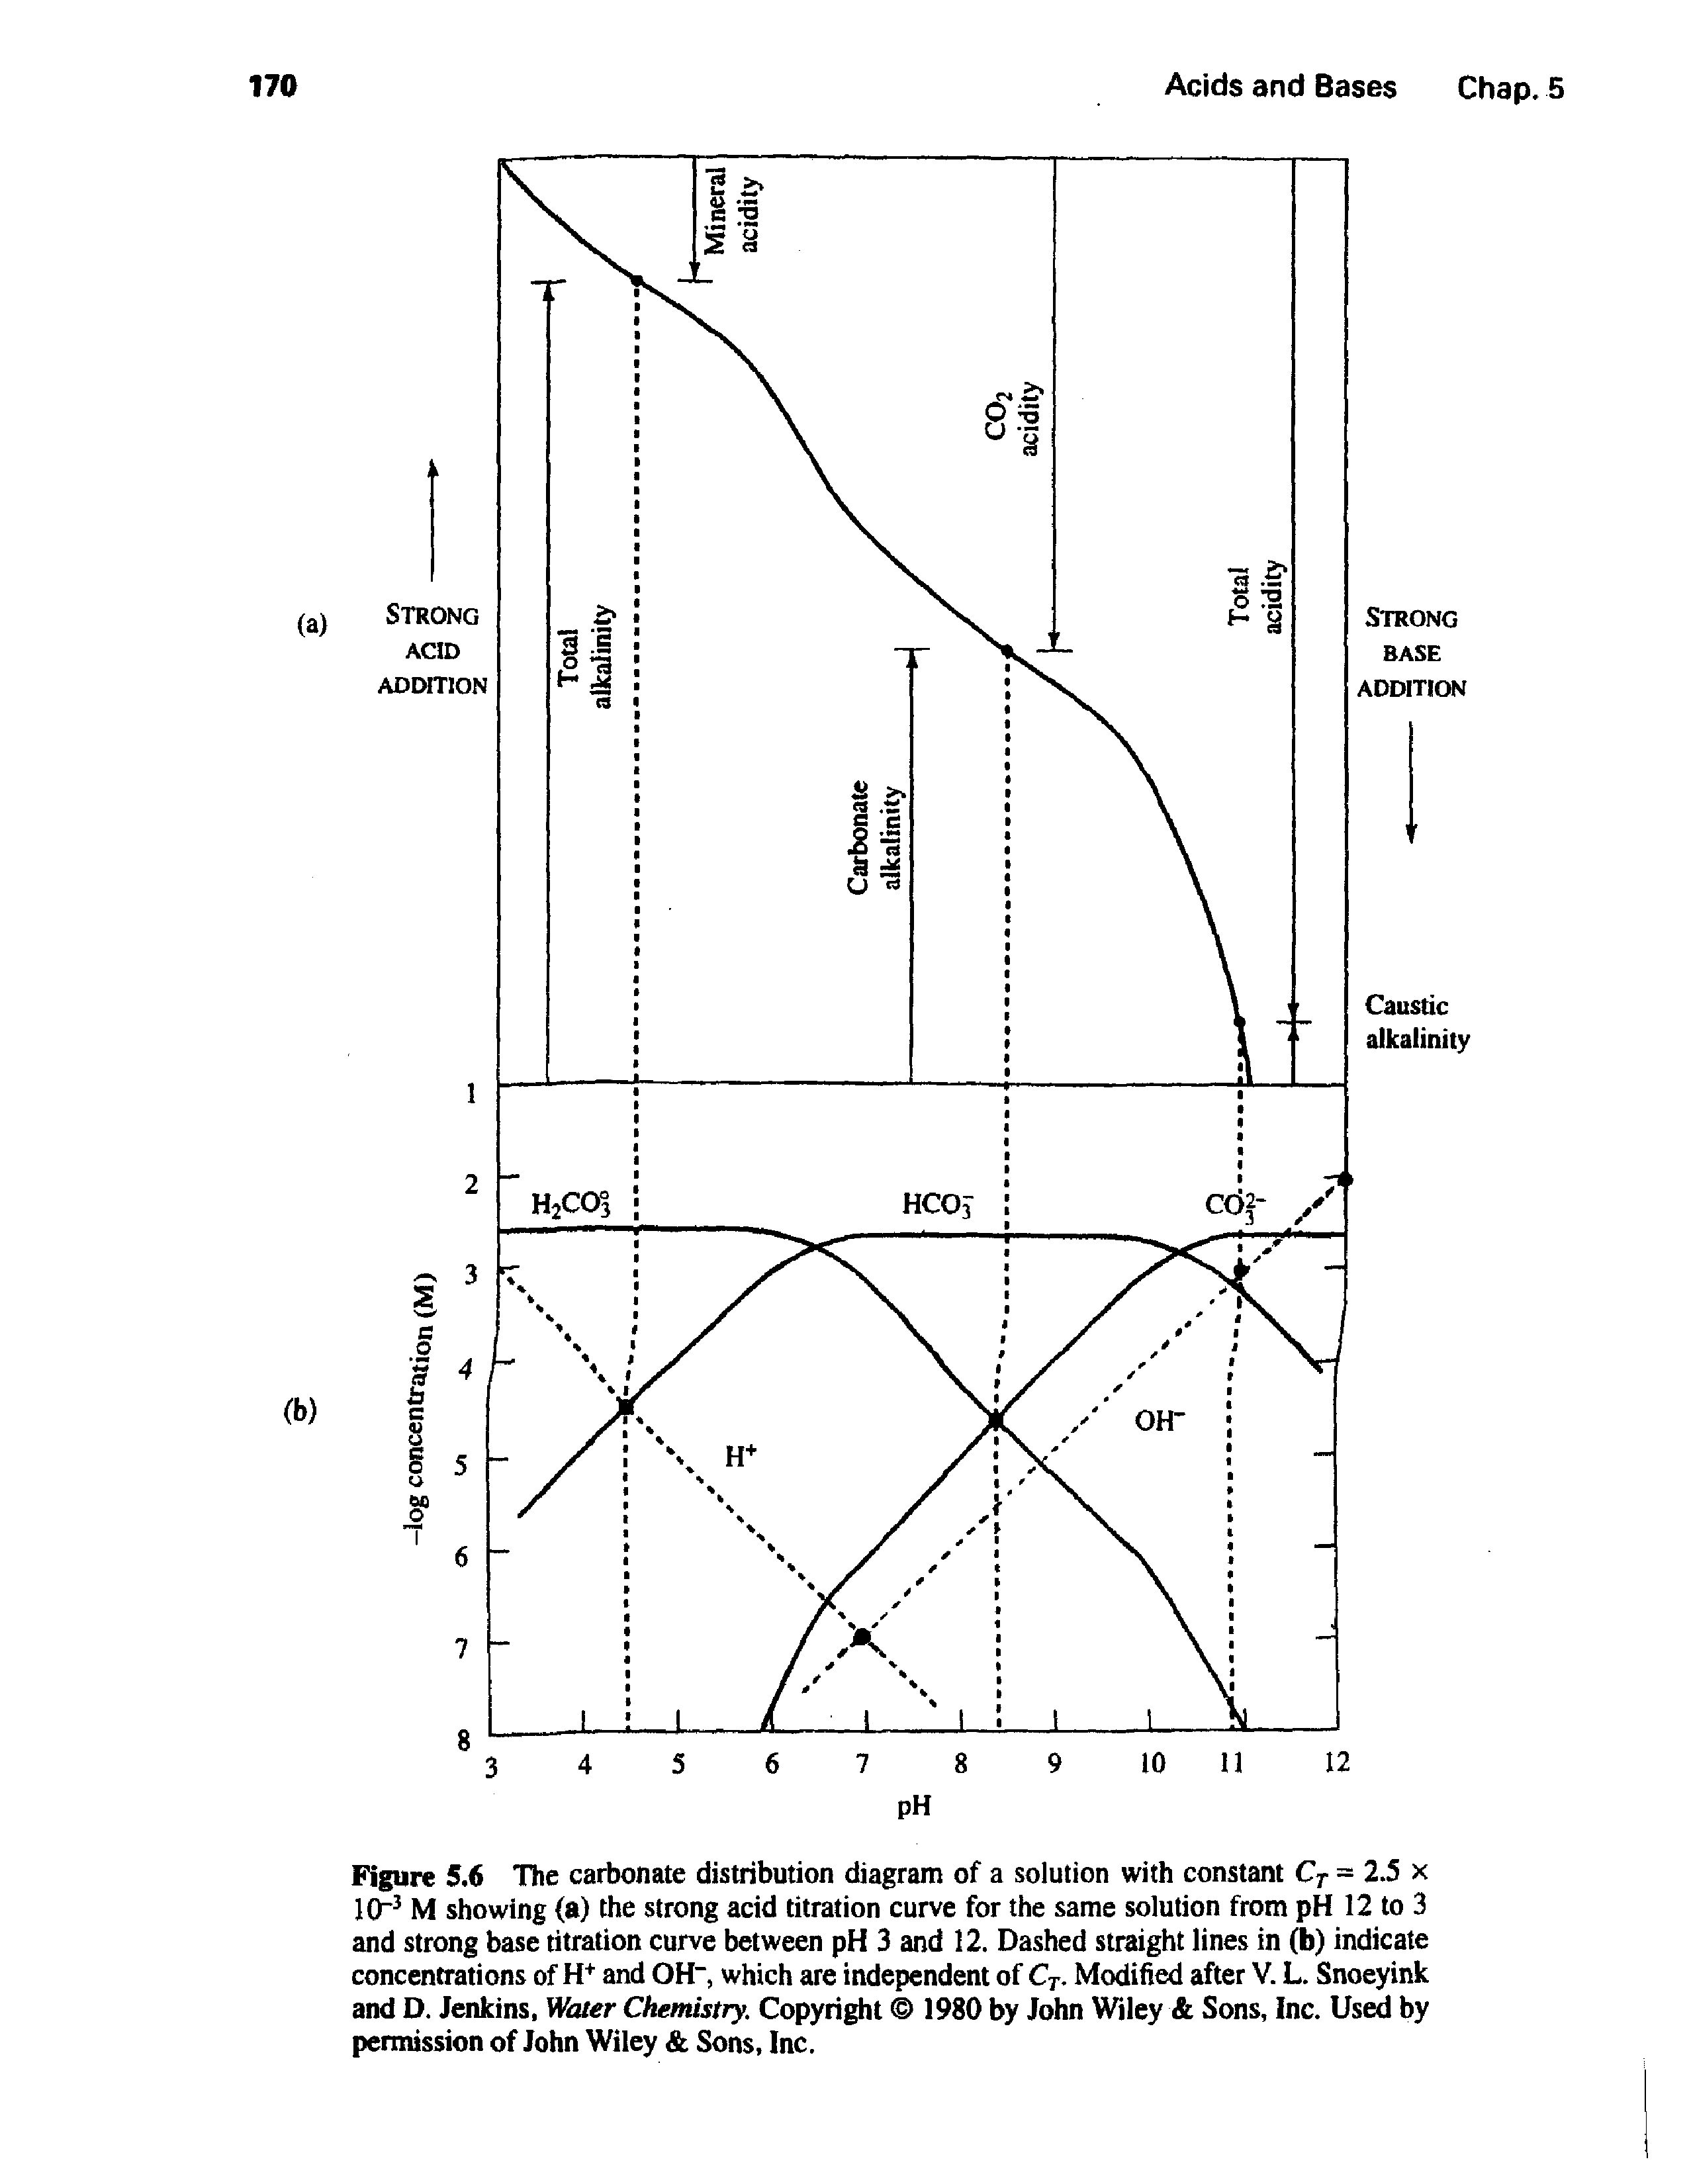 Figure 5.6 TTie carbonate distribution diagram of a solution with constant Cf = 2.5 x 10" M showing (a) the strong acid titration curve for the same solution from pH 12 to 3 and strong base titration curve between pH 3 and 12. Dashed straight lines in (b) indicate concentrations of H+ and OH", which are independent of Cj. Modified after V. L. Snoeyink and D. Jenkins, Water Chemistry. Copyright 1980 by John Wiley Sons, Inc. Used by permission of John Wiley Sons, Inc.